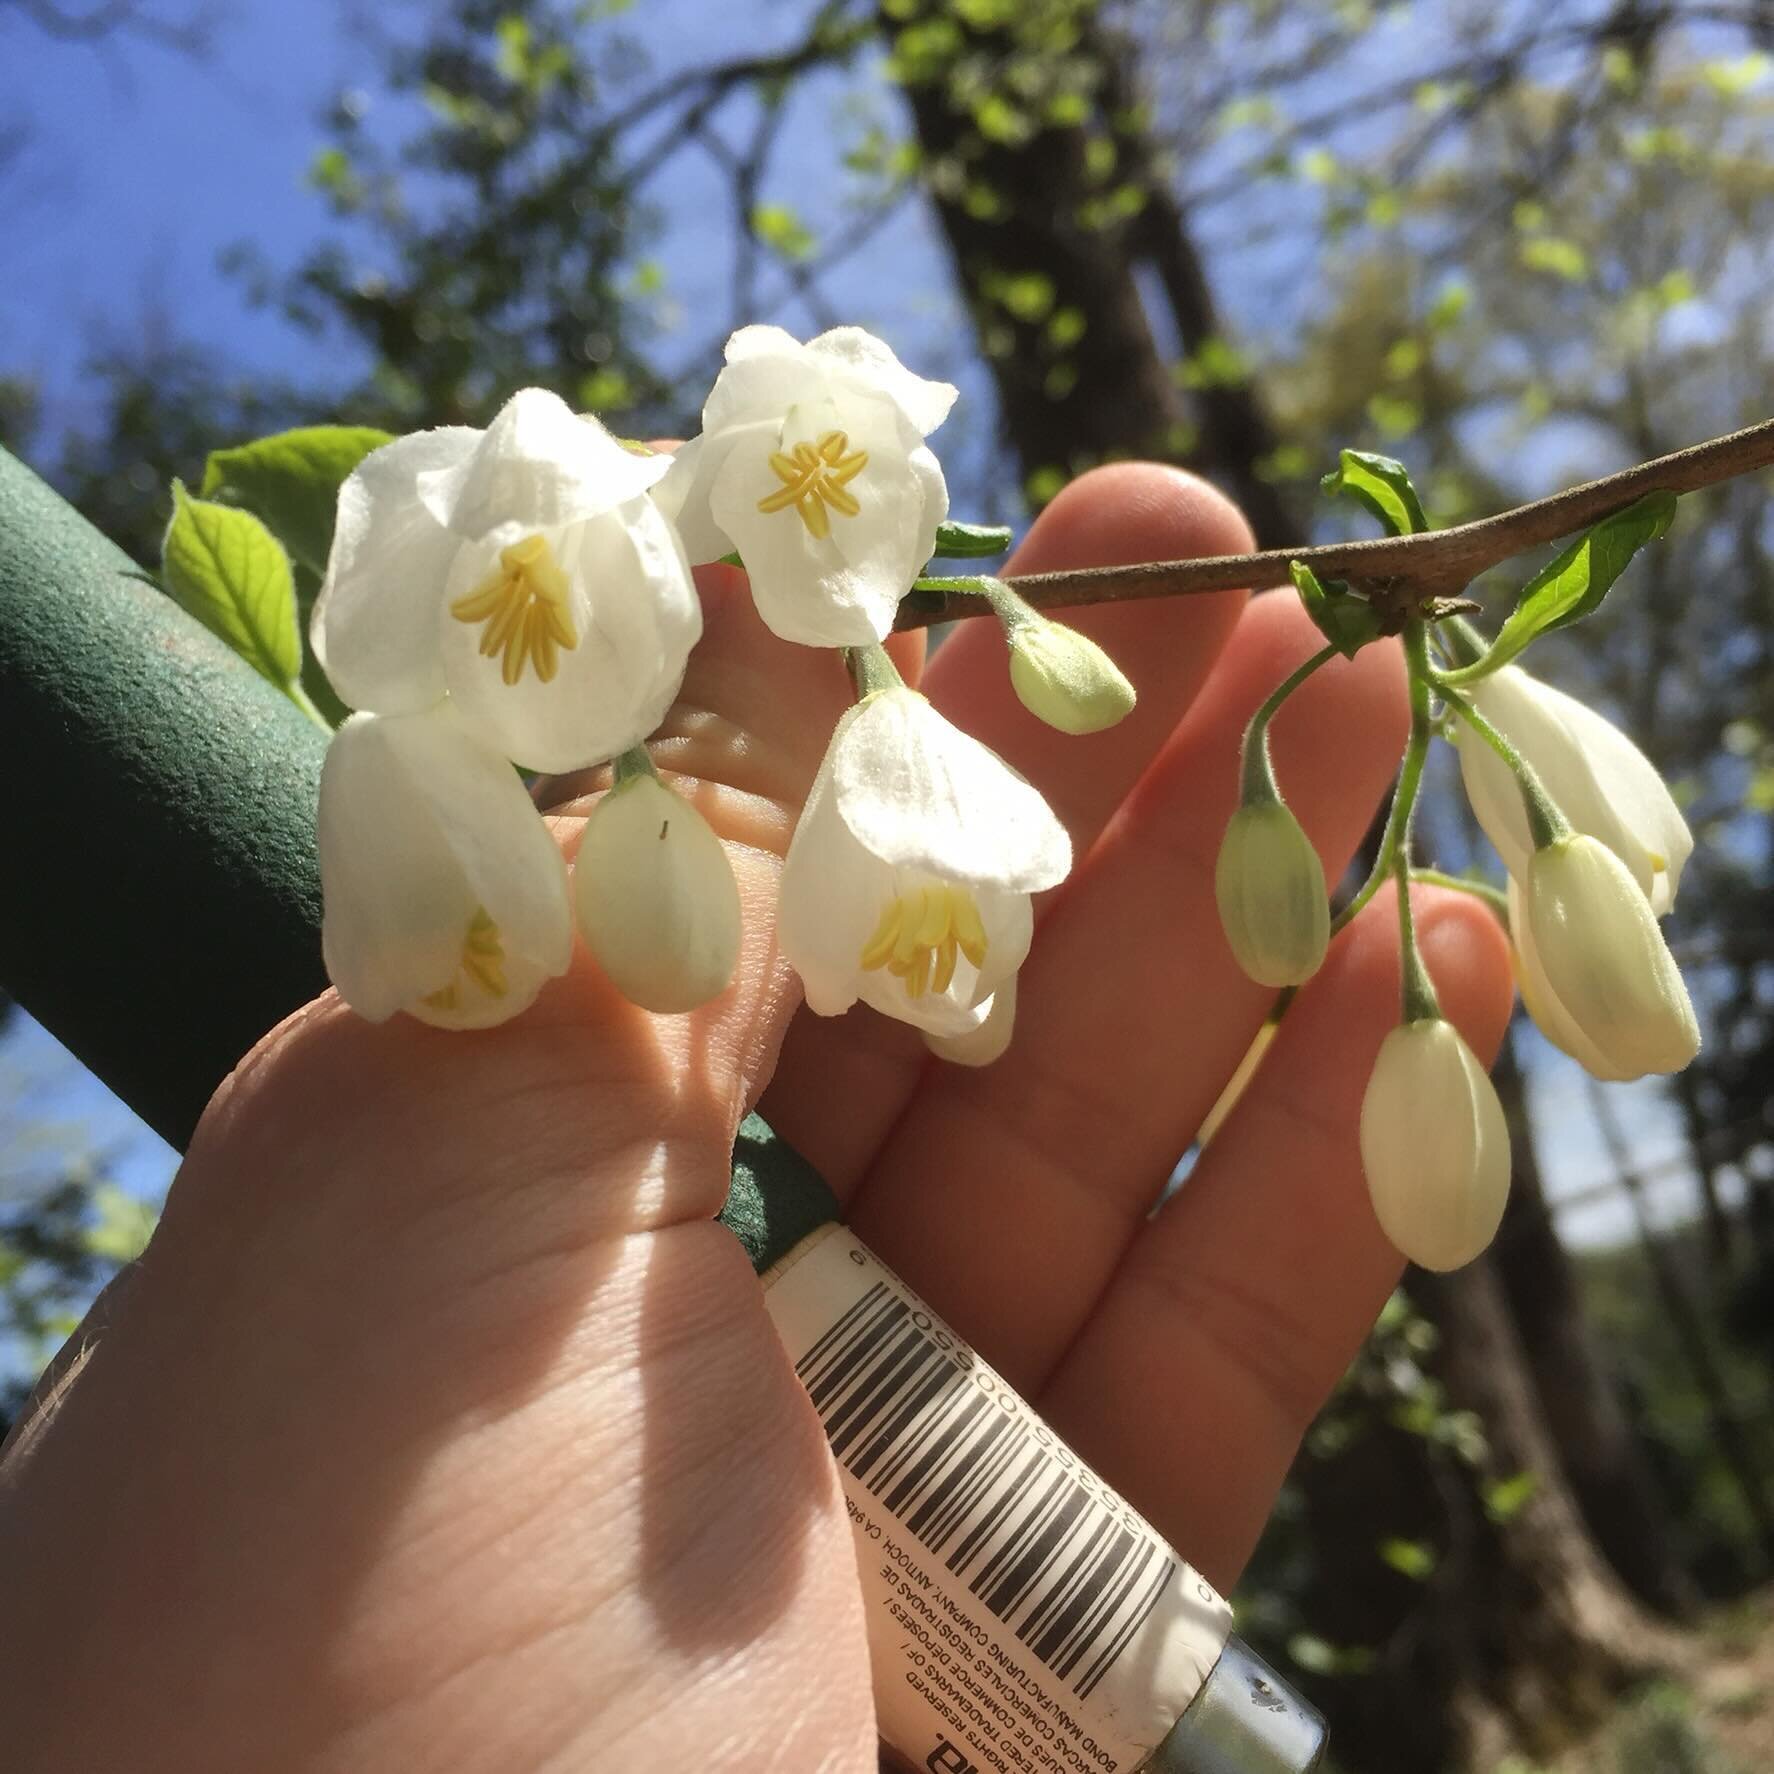 Spring has sprung, and so has the beauty of nature! Today at work, we stumbled upon this stunning Two-Winged Silverbell (Halesia diptera). Its delicate white blooms remind us to pause and appreciate the wonders around us. Let&rsquo;s welcome this sea